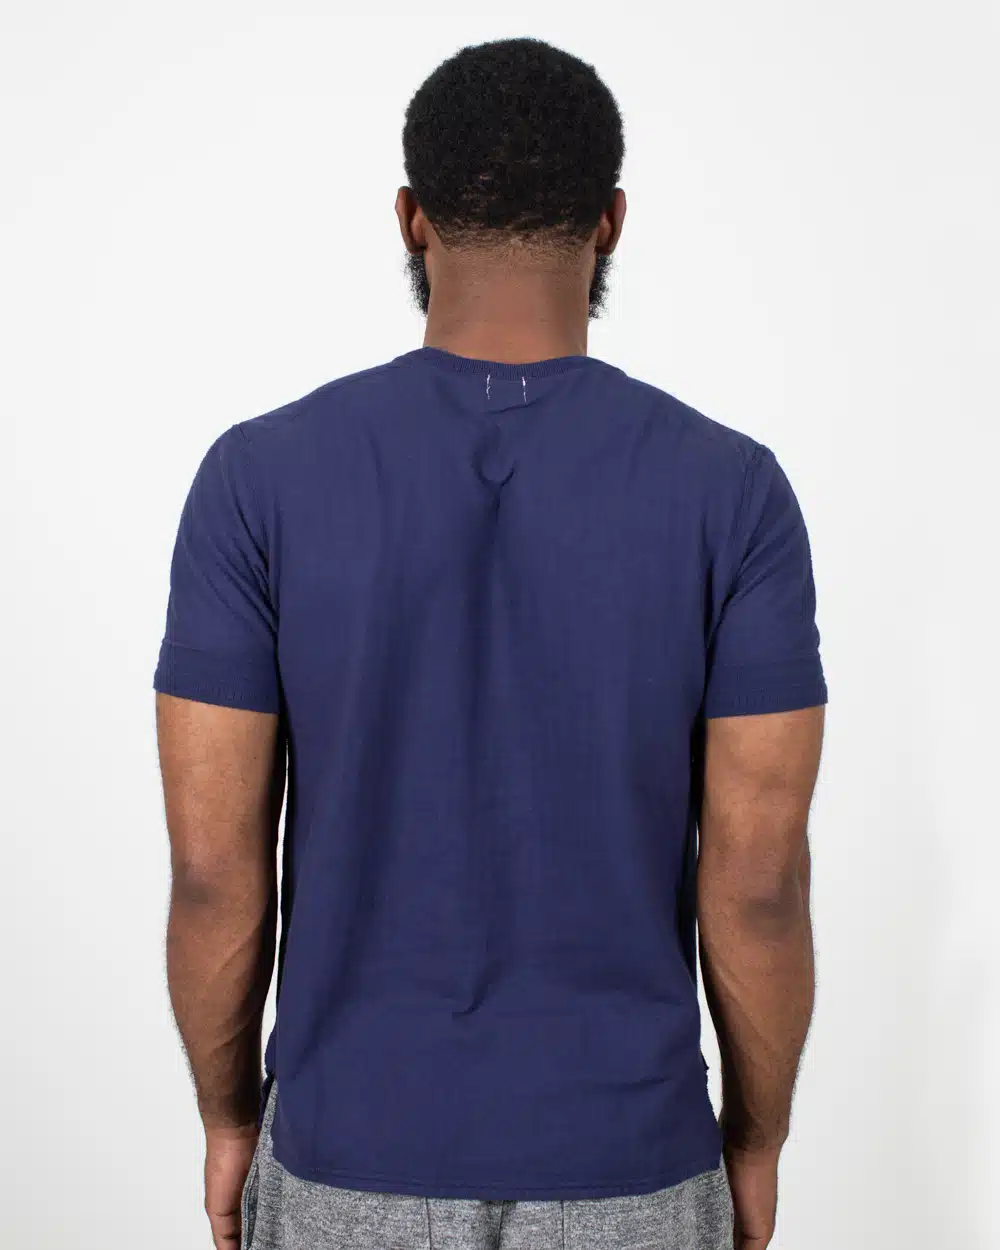 Loop & Weft Ribbed Military Henley - French Navy Blue